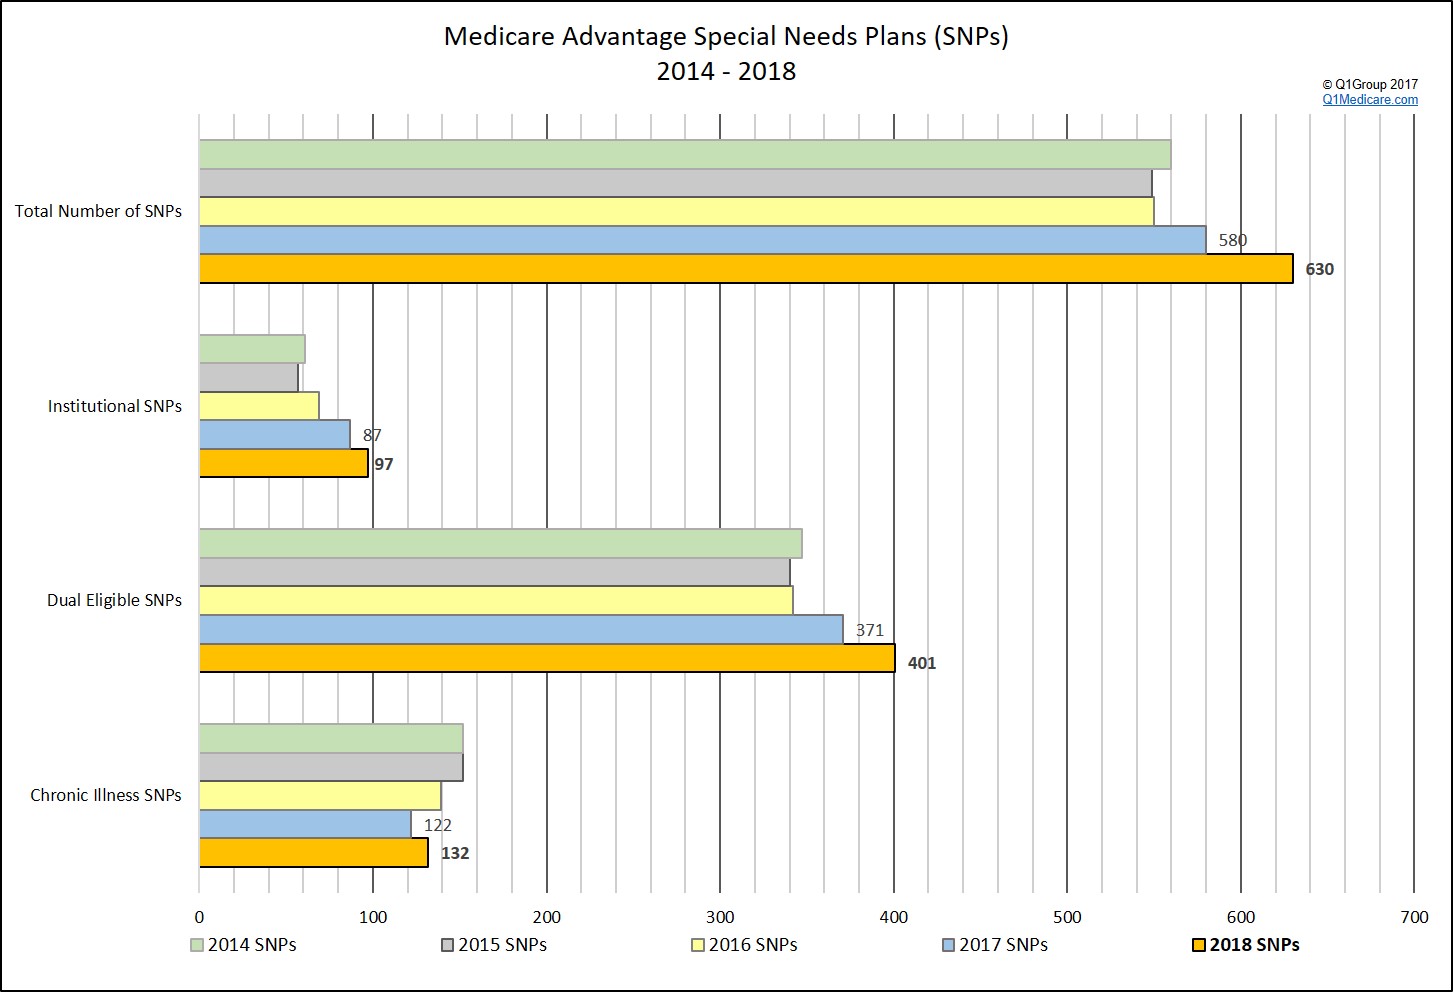 Showing the different types of Medicare Advantage Special Needs Plans(SNPs) over the years